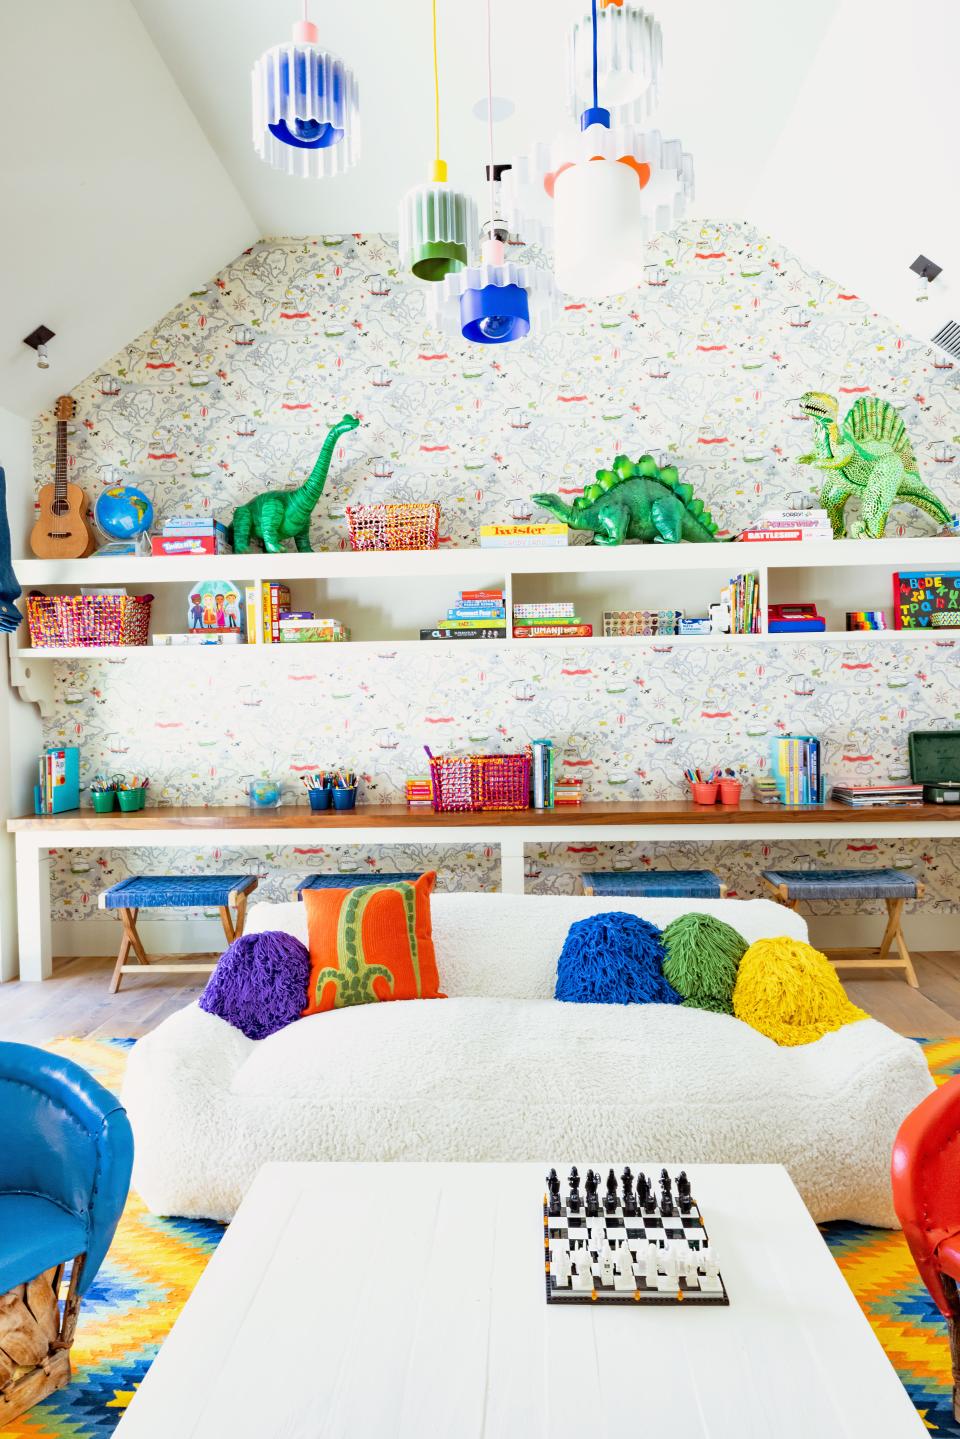 Five recycled-plastic pendants by Warren & Laetitia hang in the kids’ playroom above an RH Kids sofa with crochet pillows from Coming Soon NY. The wallpaper is by Walnut. The four indigo benches are from Lost & Found L.A.